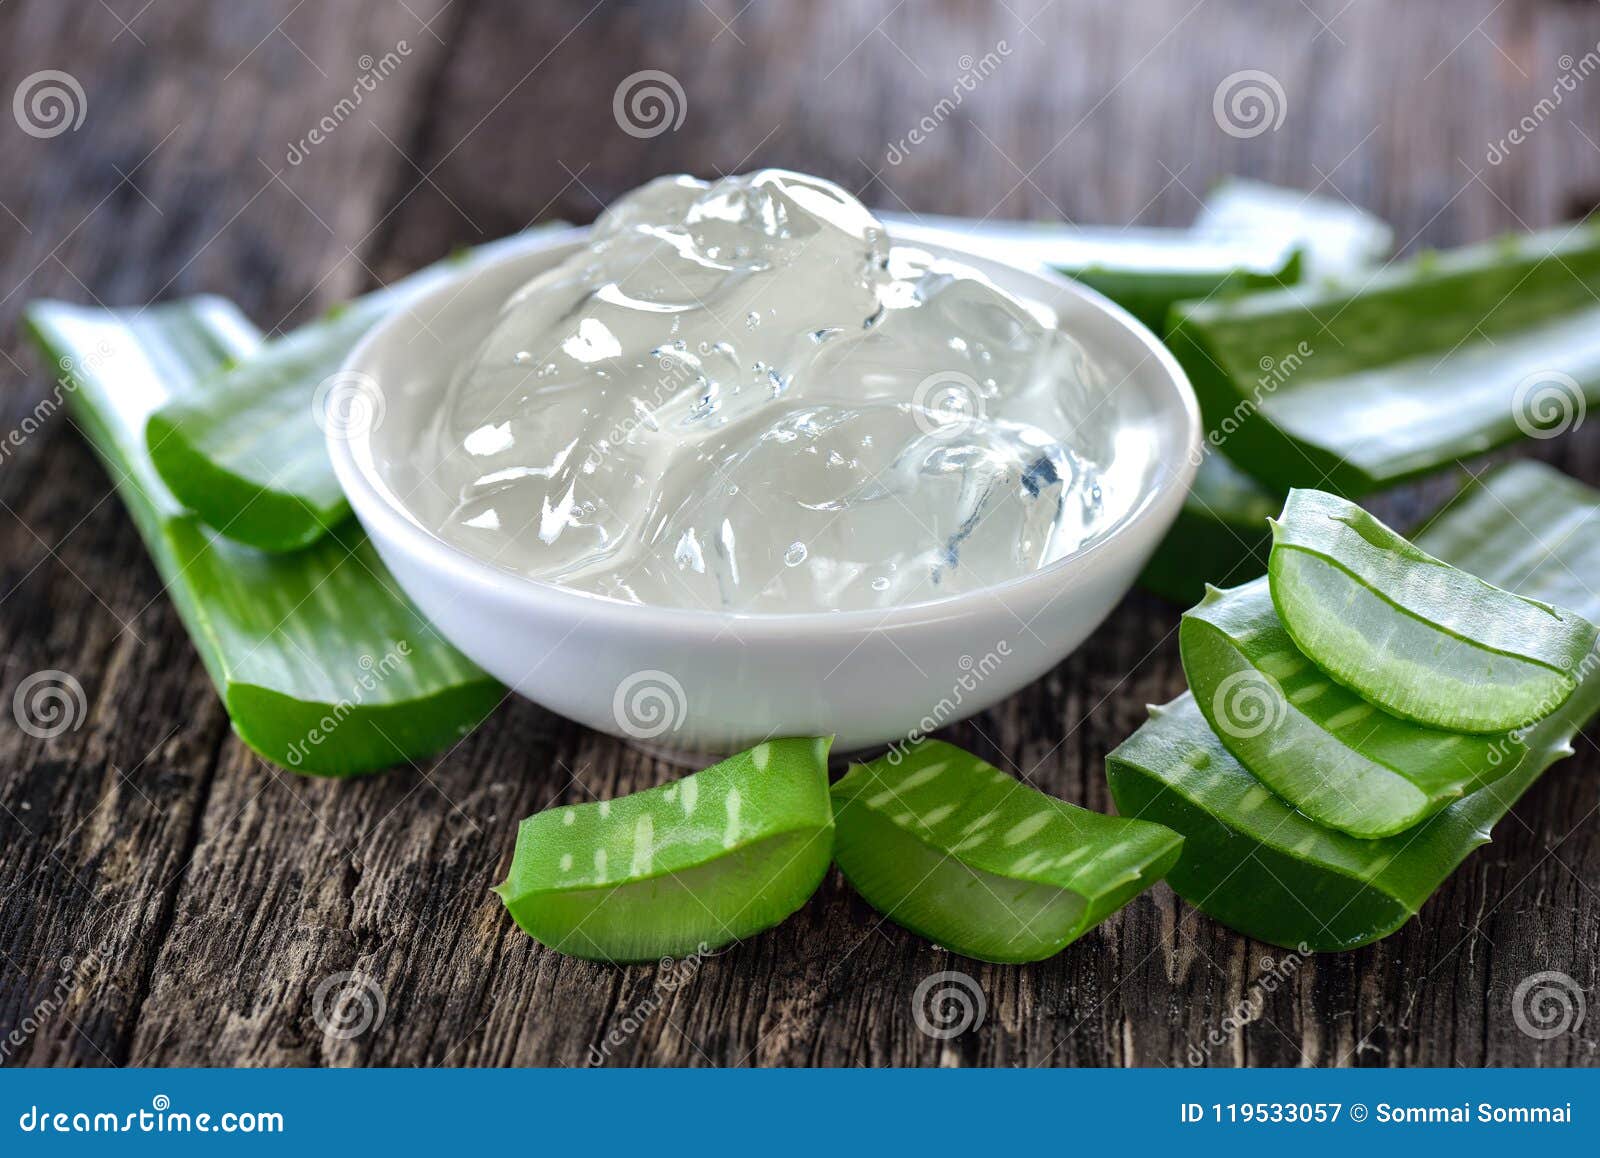 aloe vera gel in bowl with on wooden table